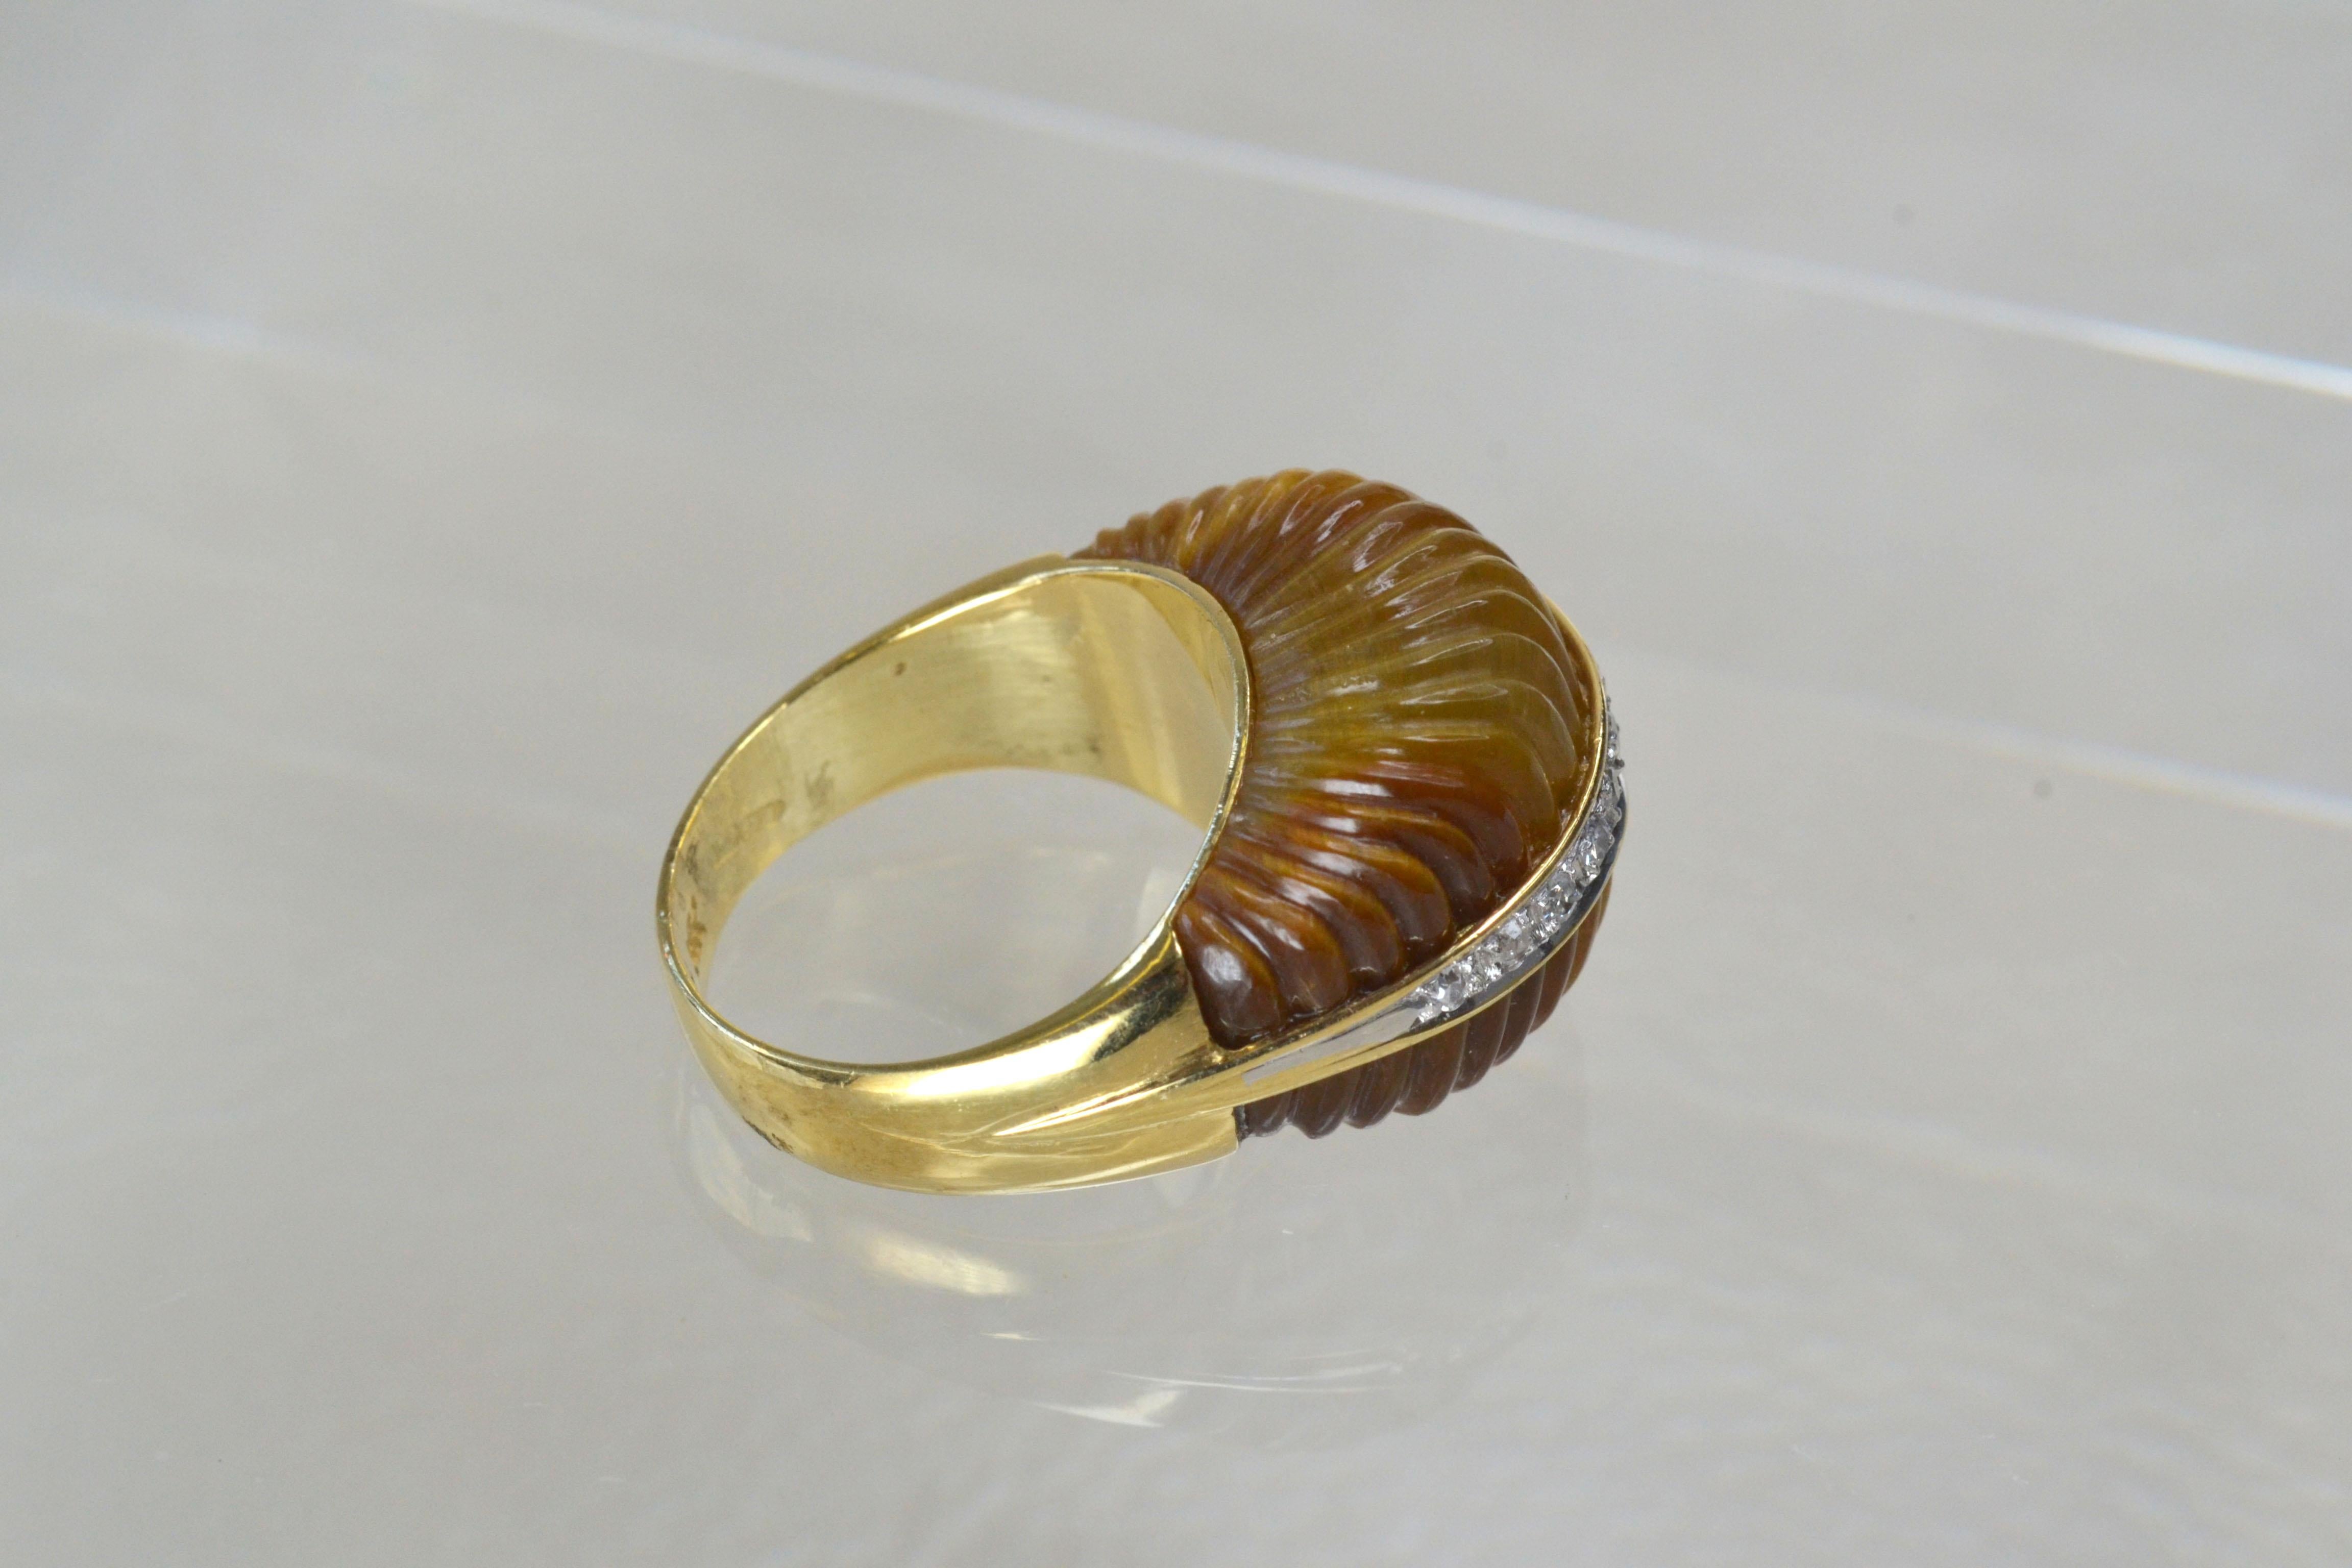 Vintage 14k Gold Tiger's Eye Scalloped Ring One-of-a-kind In Good Condition For Sale In London, GB